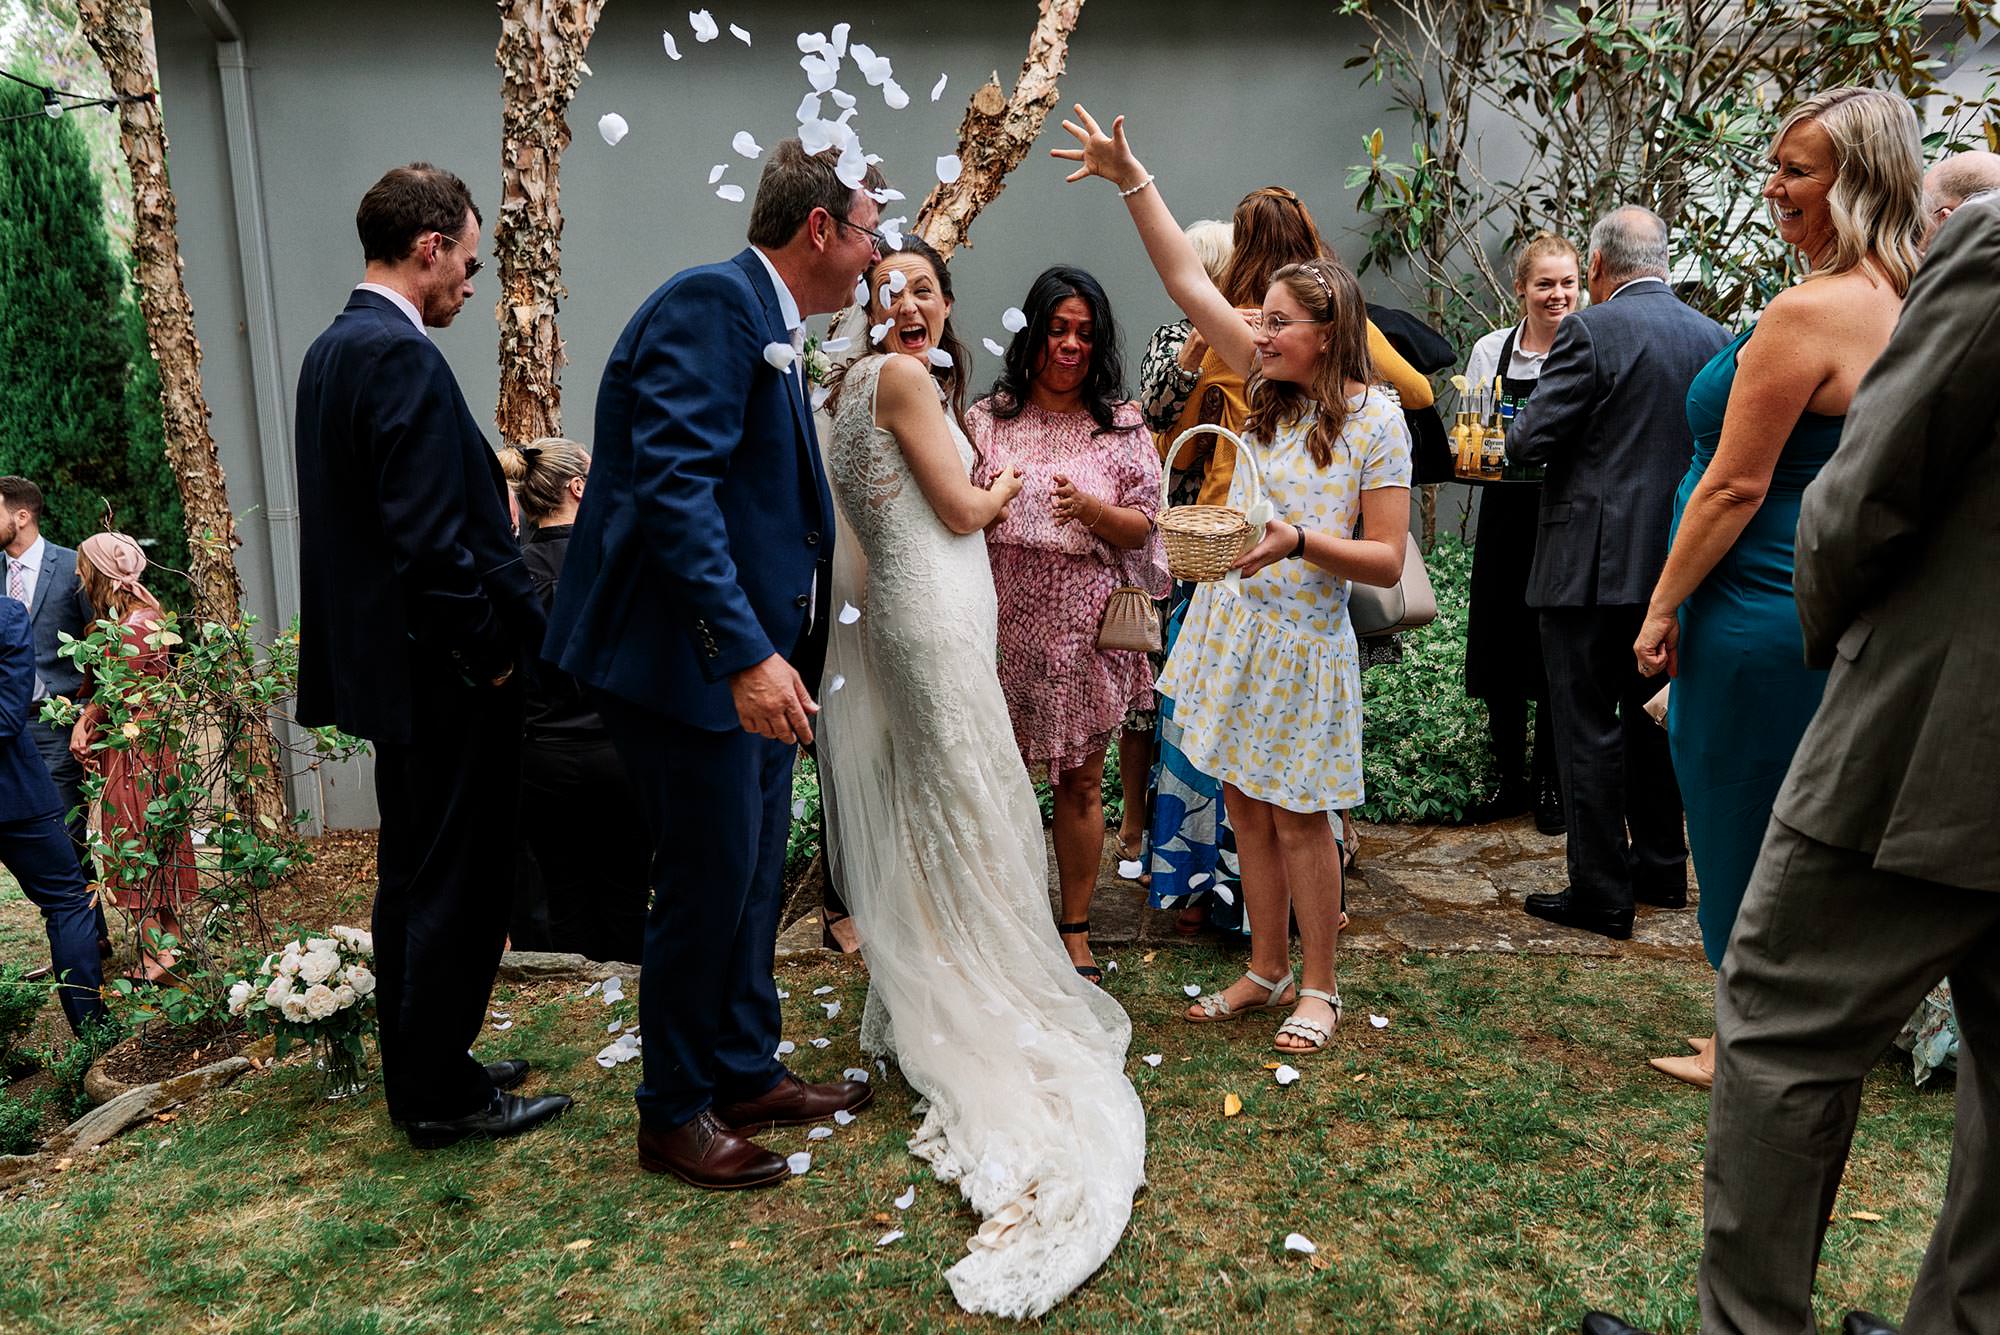 throwing petals over the bridal couple